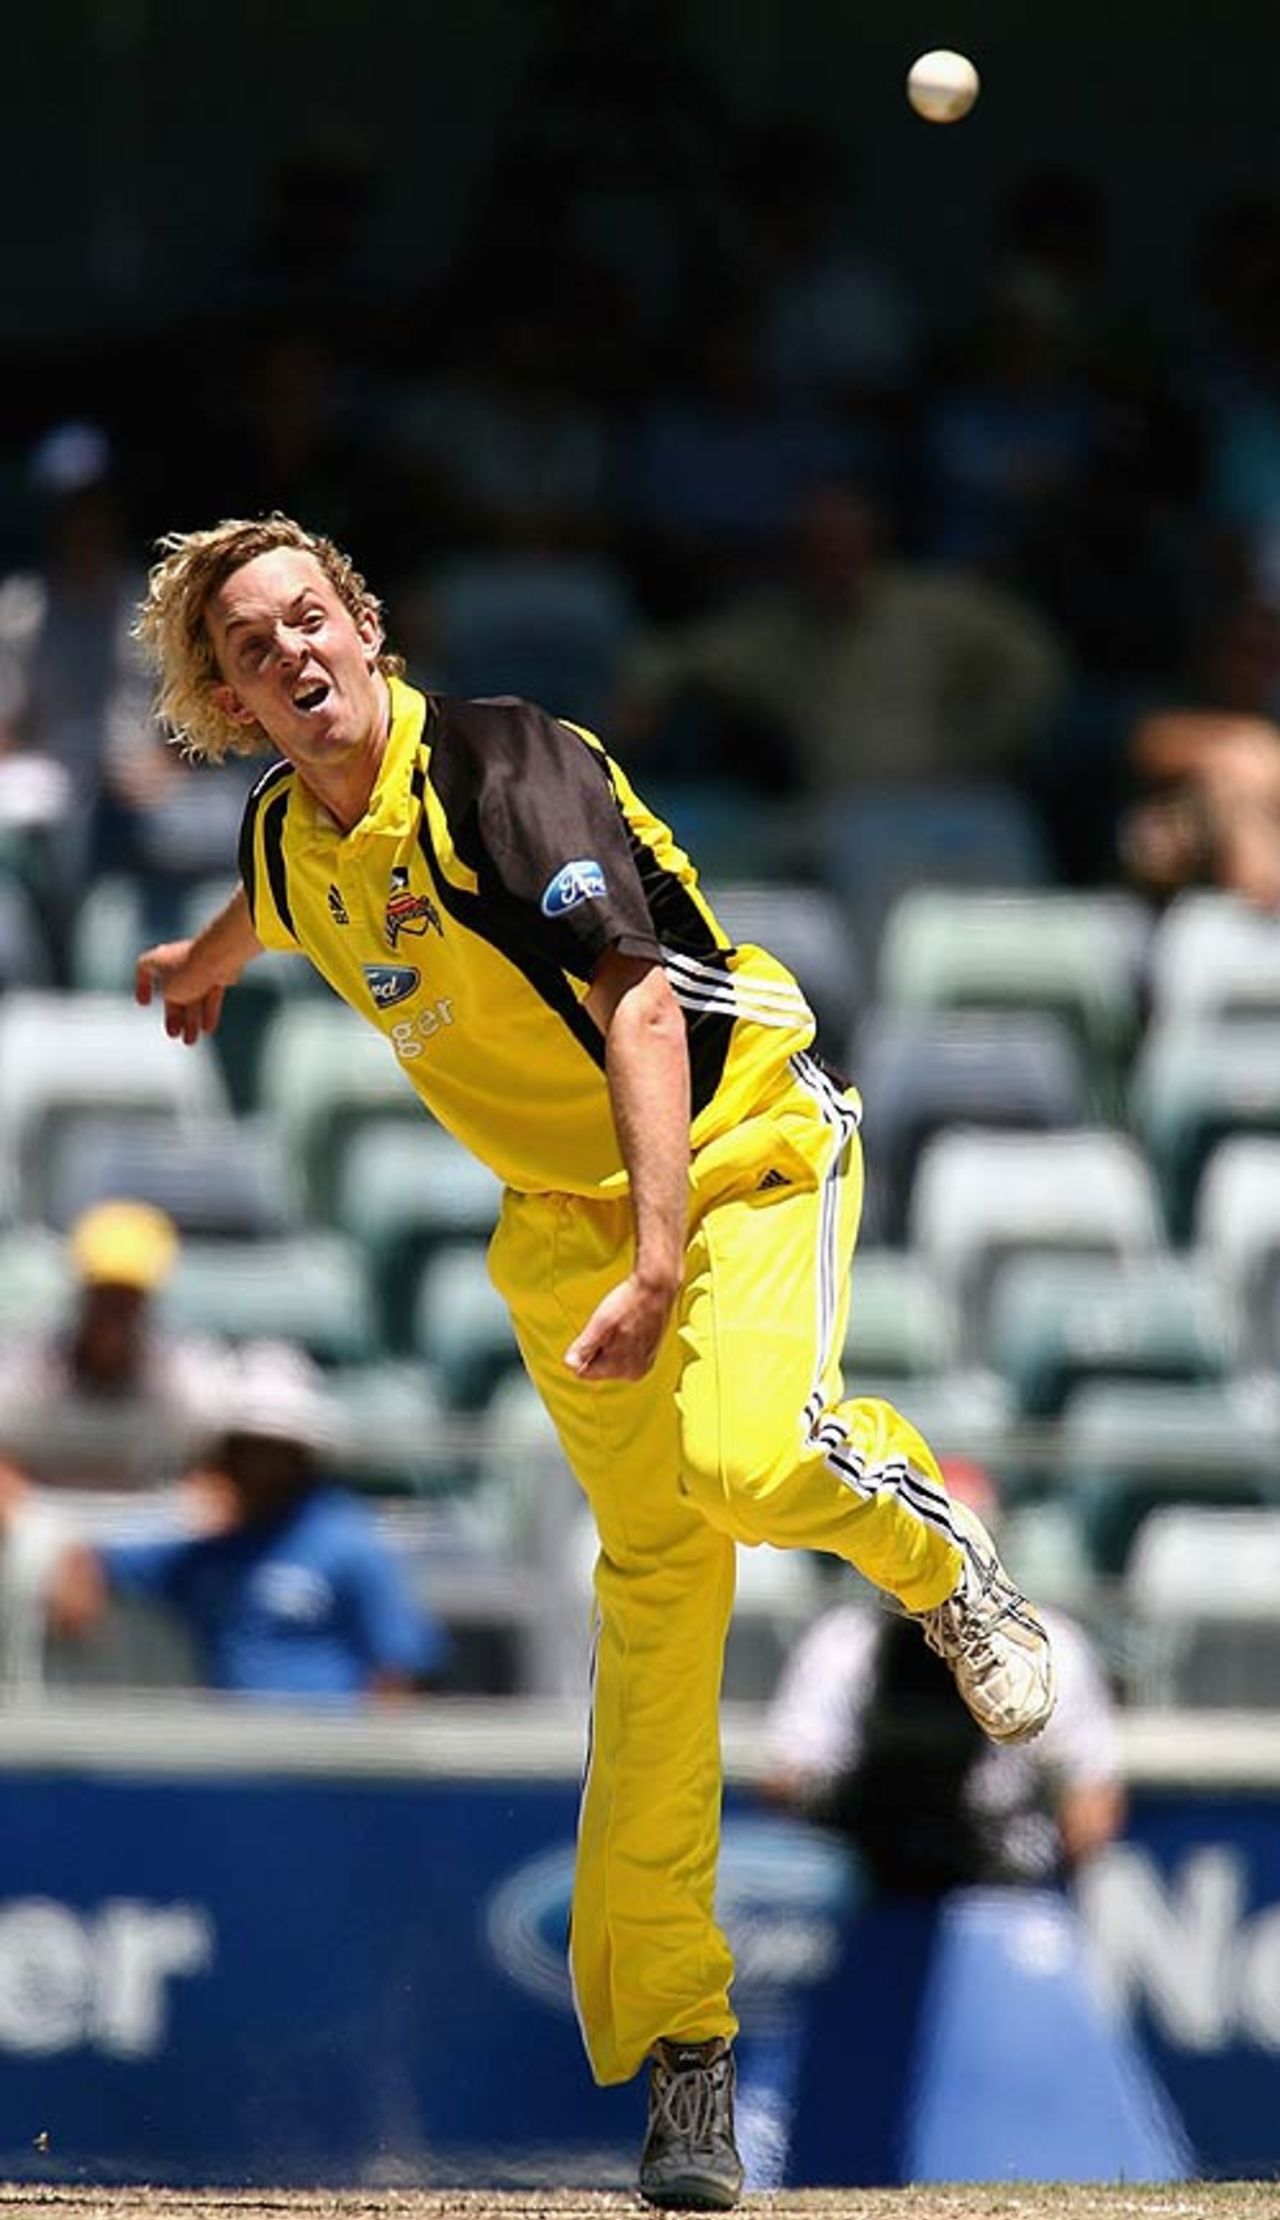 Aaron Heal bowls during his spell of 1 for 39, Western Australia v South Australia, FR Cup, Perth, January 17, 2007